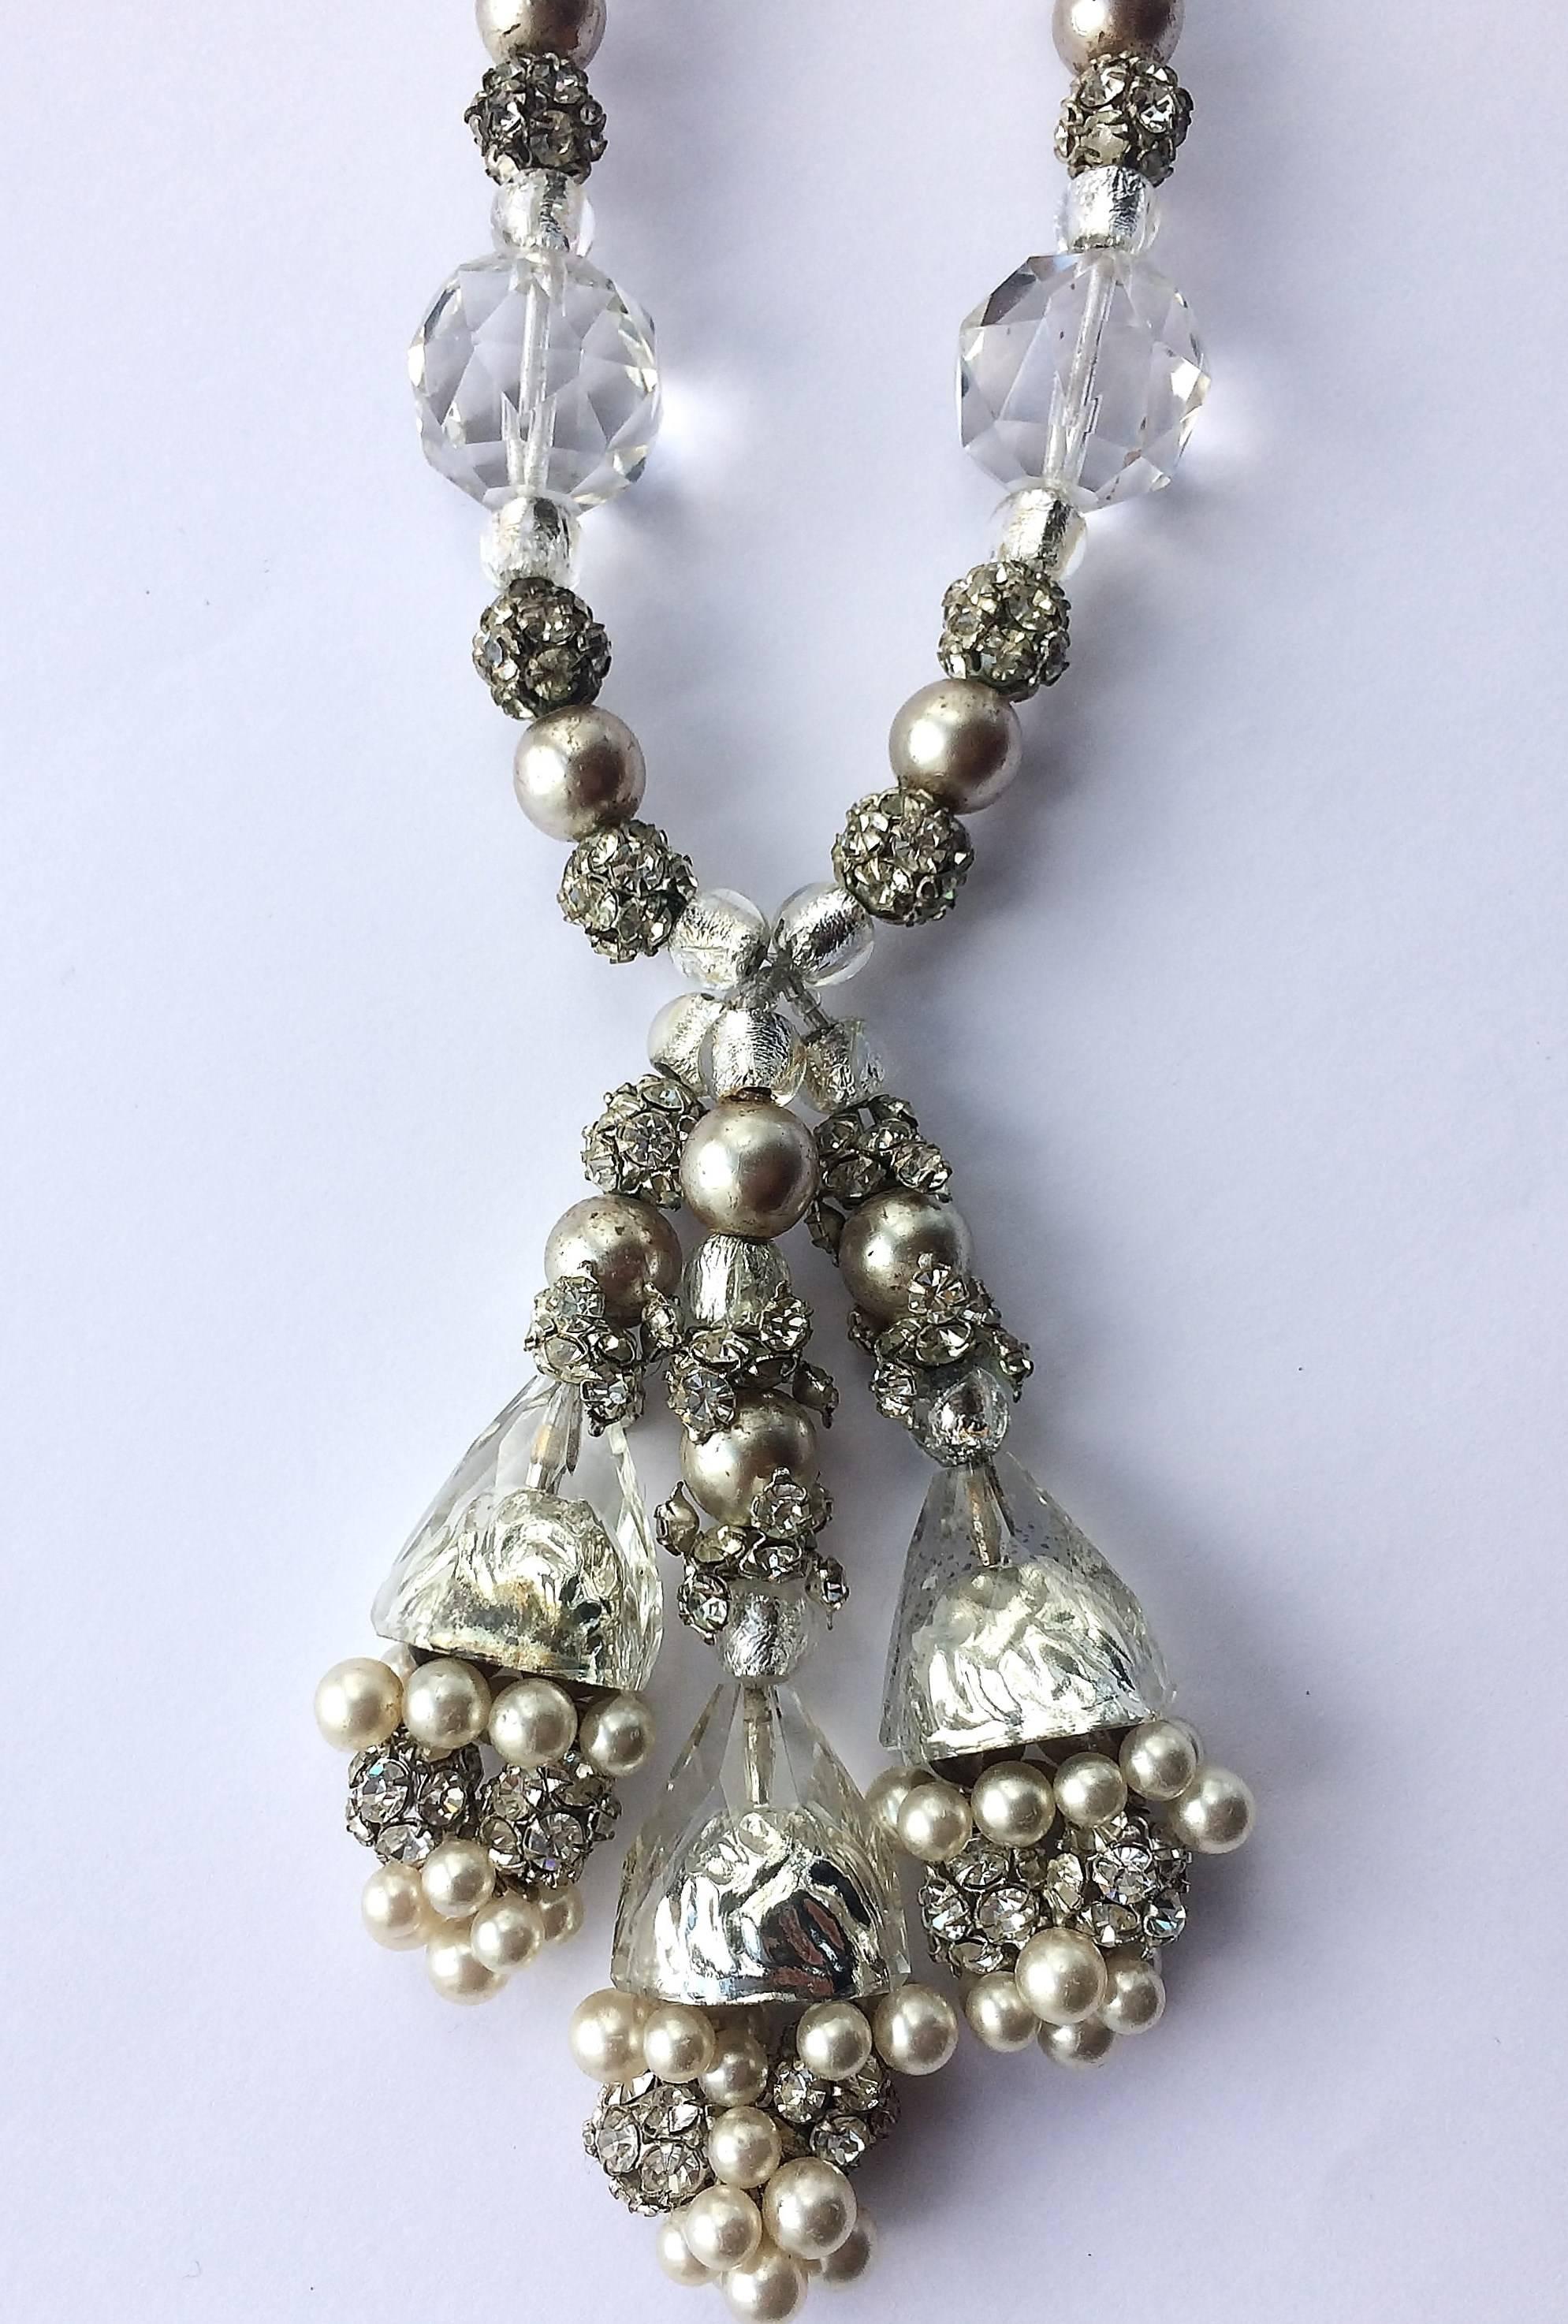 Striking clear glass, silver foiled glass beads, cream pearl and paste ball sautoir necklace, with an adjustable hook/closure. With assorted sizes and shape of bead, the necklace has a triple drop , consisting of silver foiled glass 'caps and